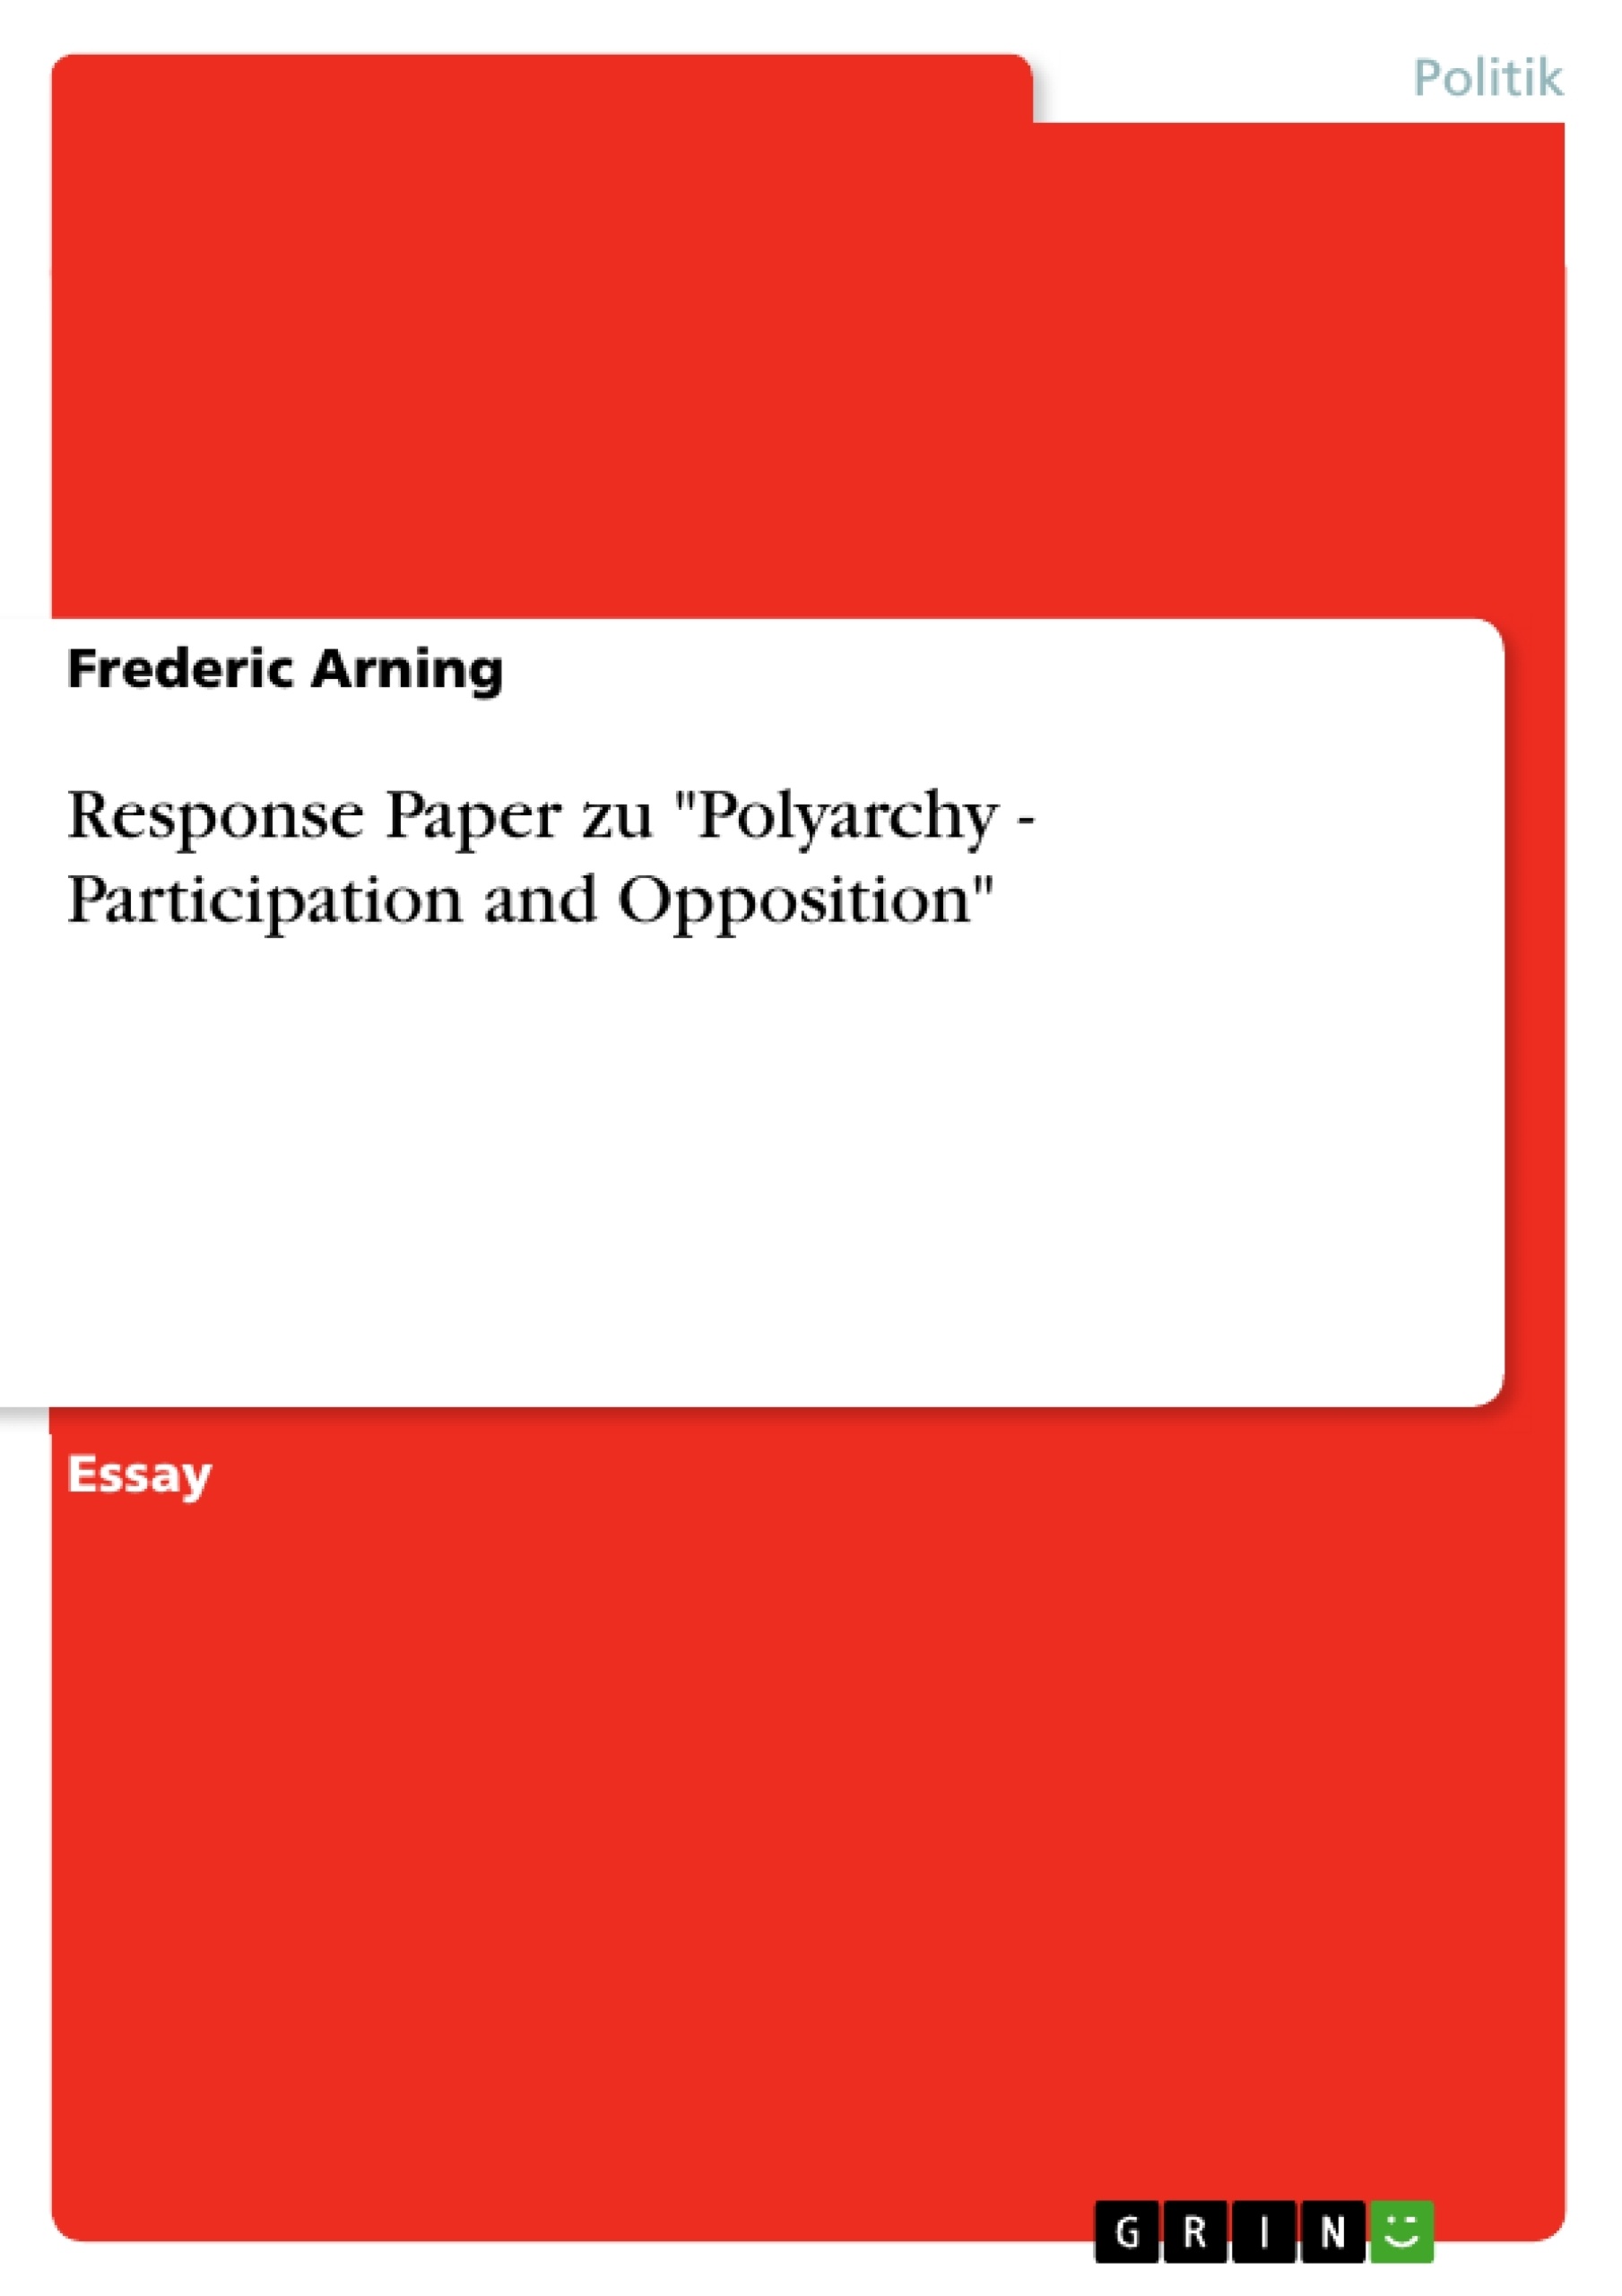 Titre: Response Paper zu "Polyarchy - Participation and Opposition"